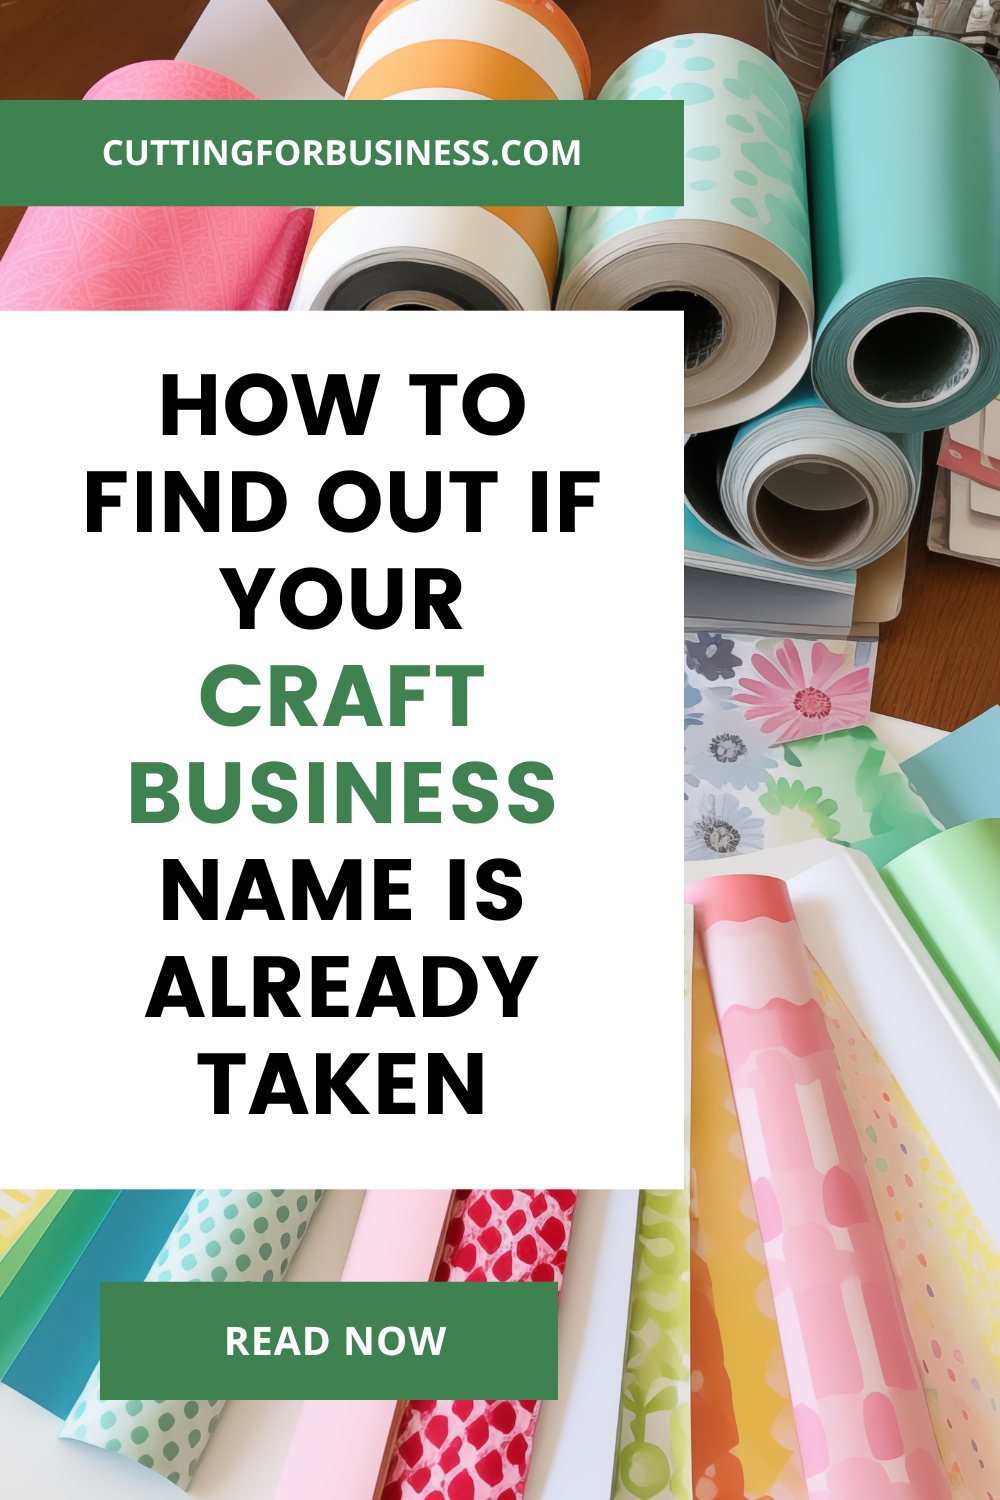 How to Find Out If Your Craft Business Name is Already Taken - cuttingforbusiness.com